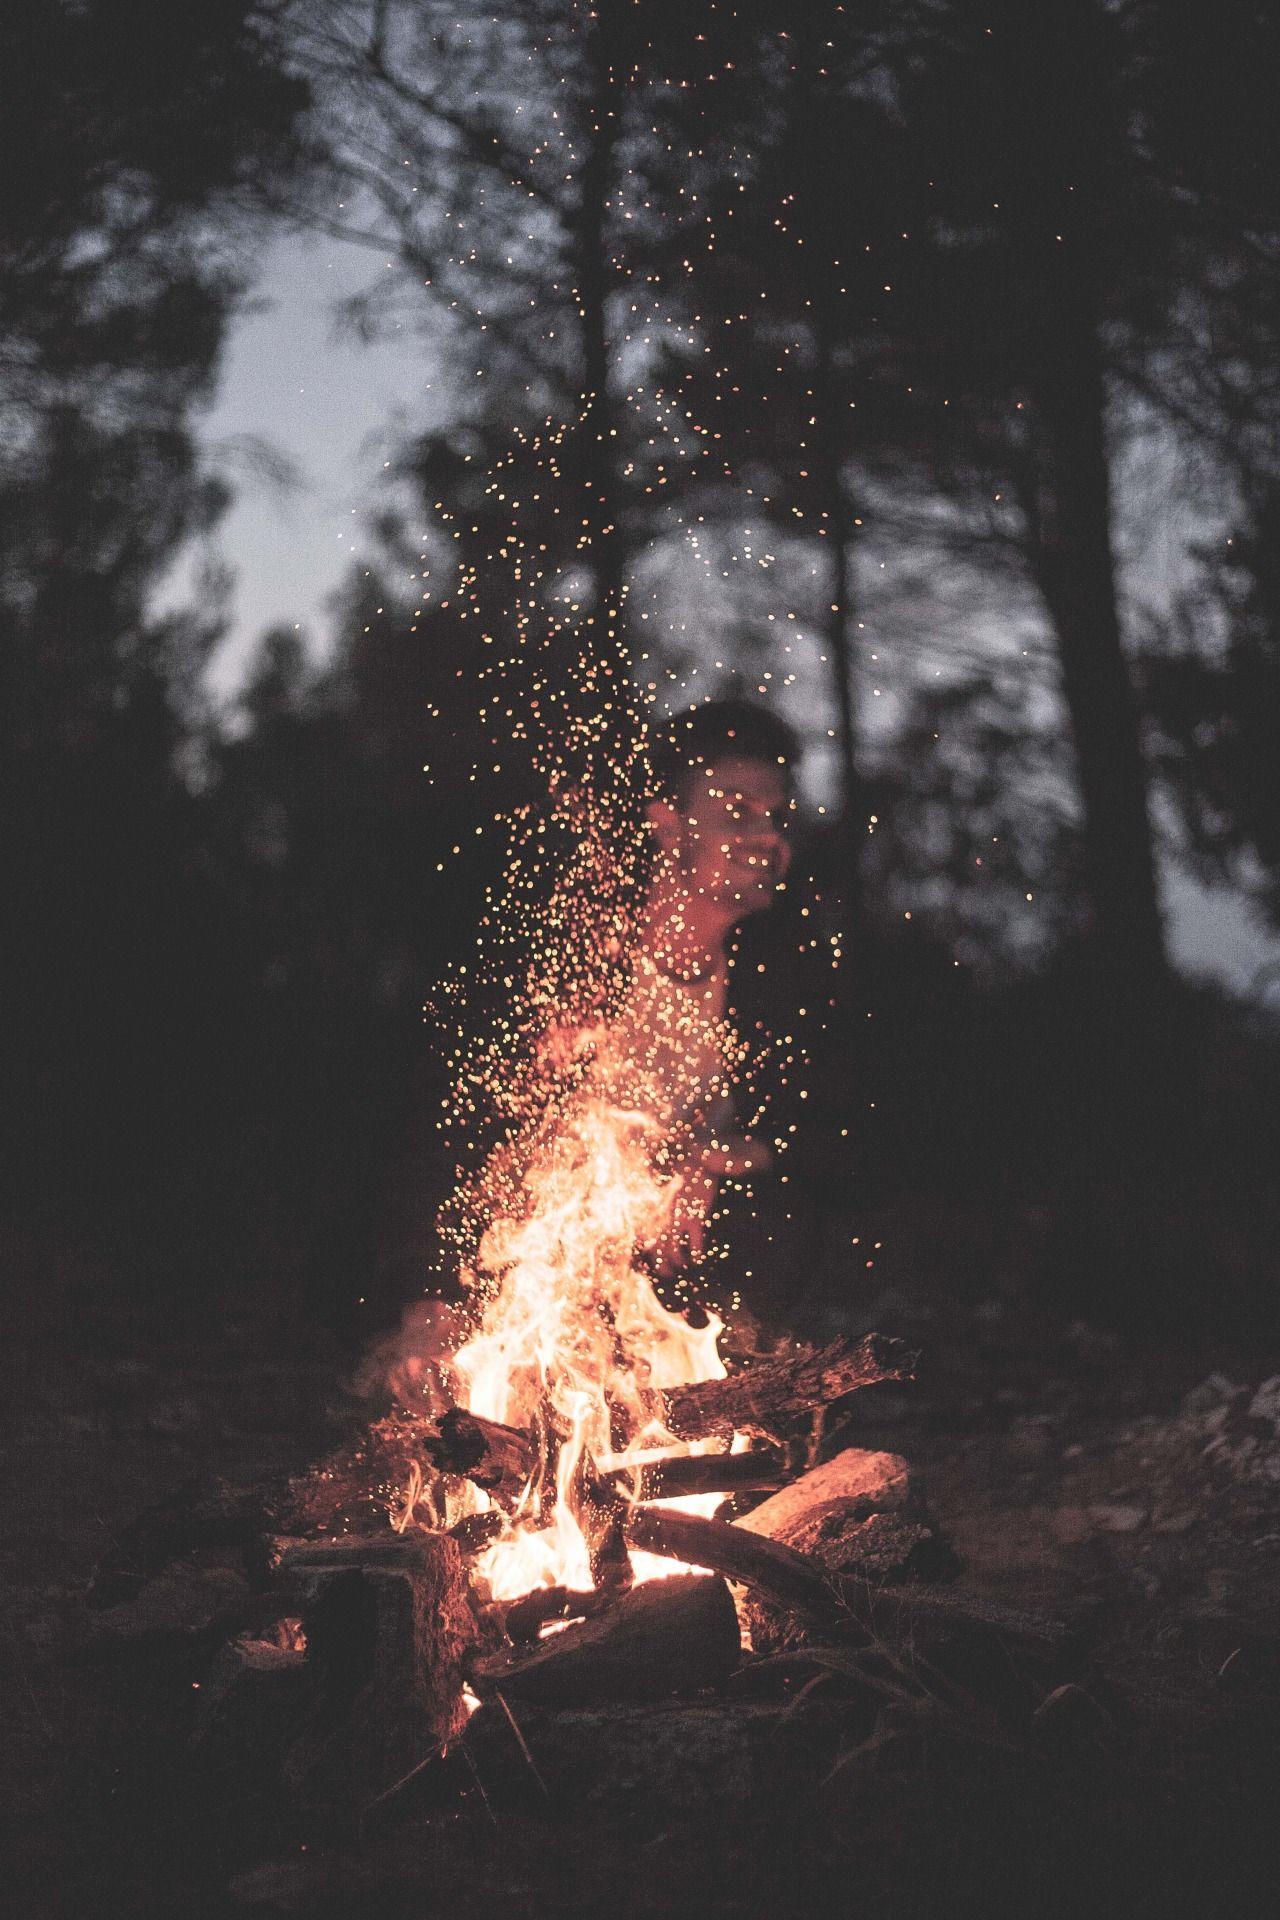 ourlifeintransit: Fireside's no place quite like it